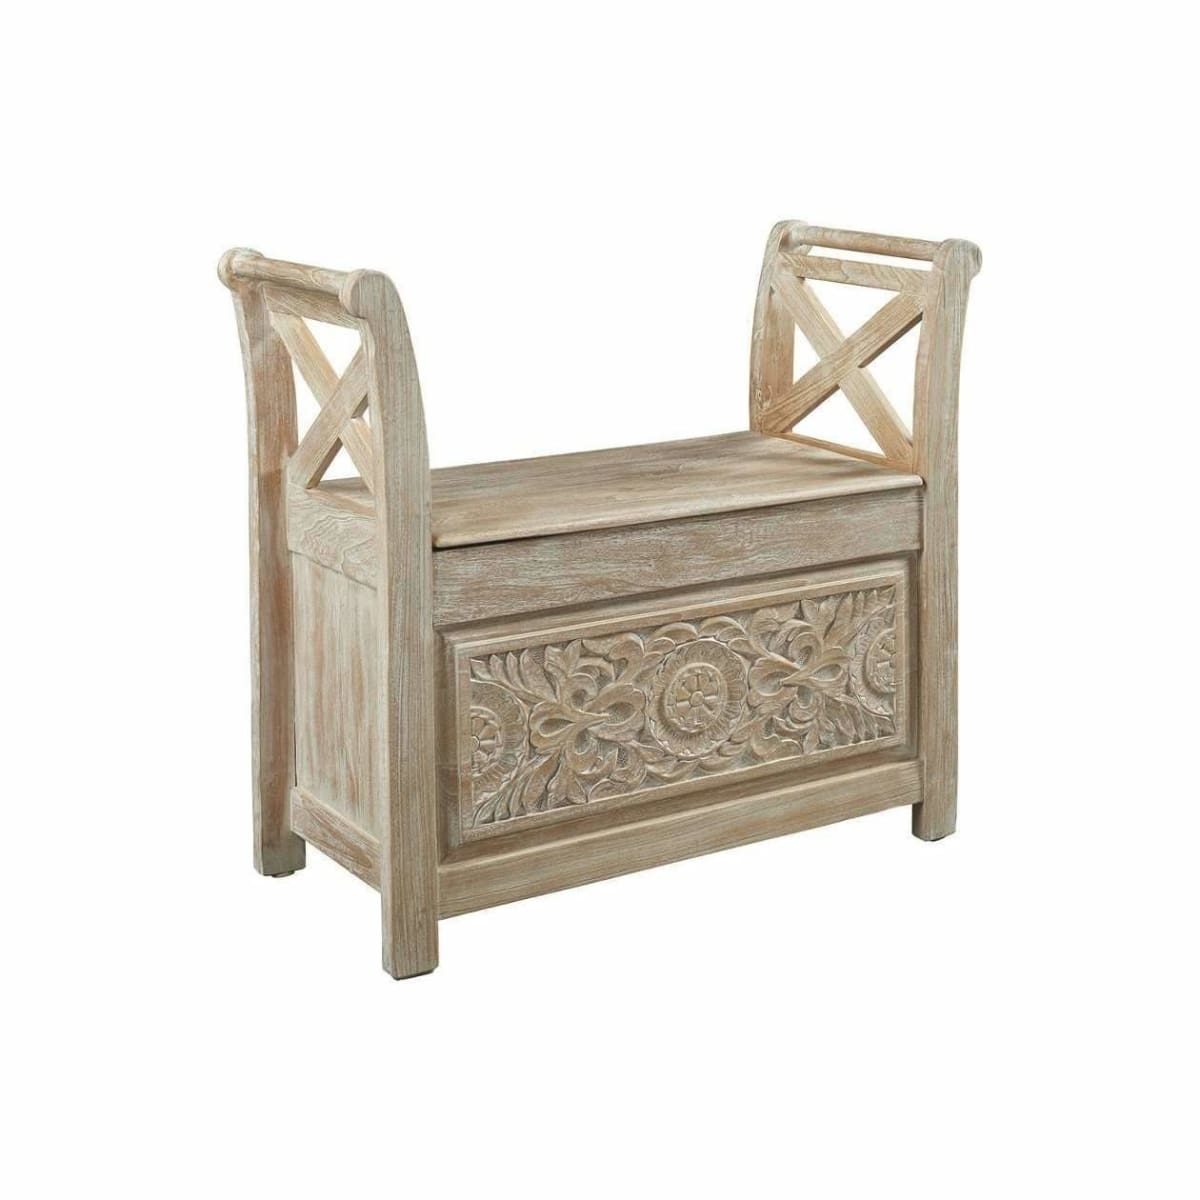 Fossil Ridge White Wash Accent Bench - Long Bench